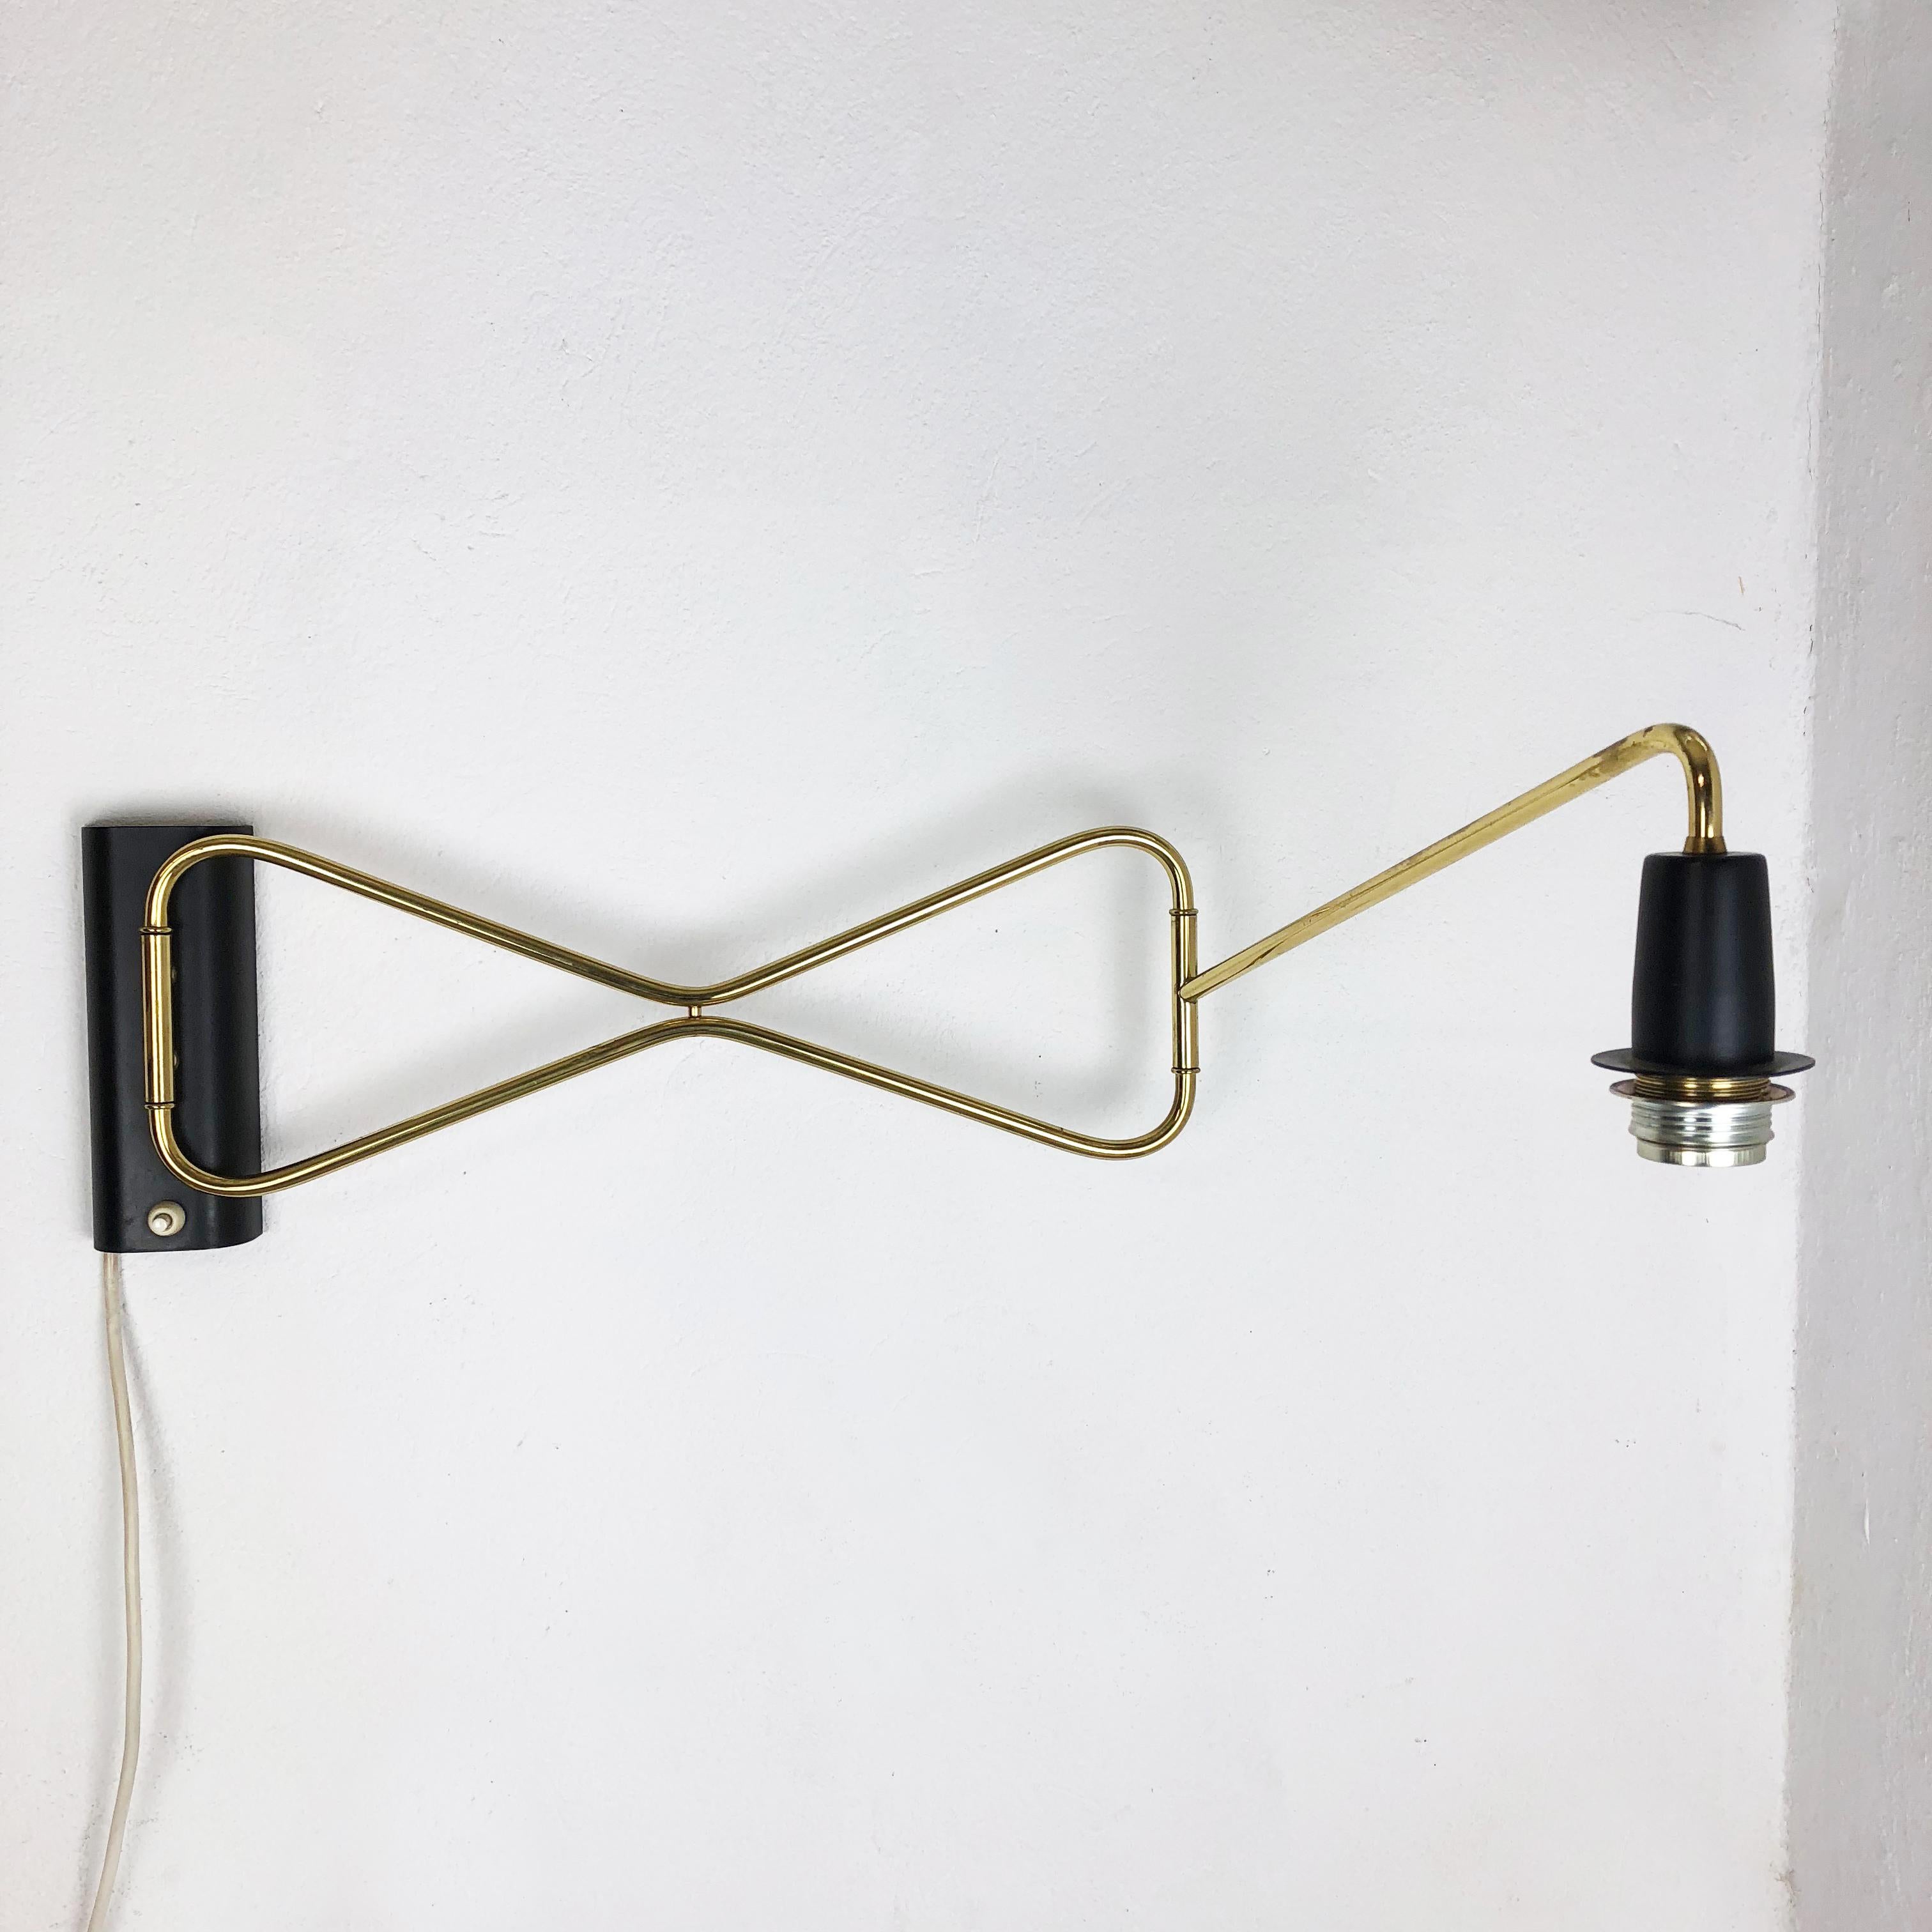 Original Modernist 1950s Brass Metal Swing Wall Light Made by Cosack, Germany 6